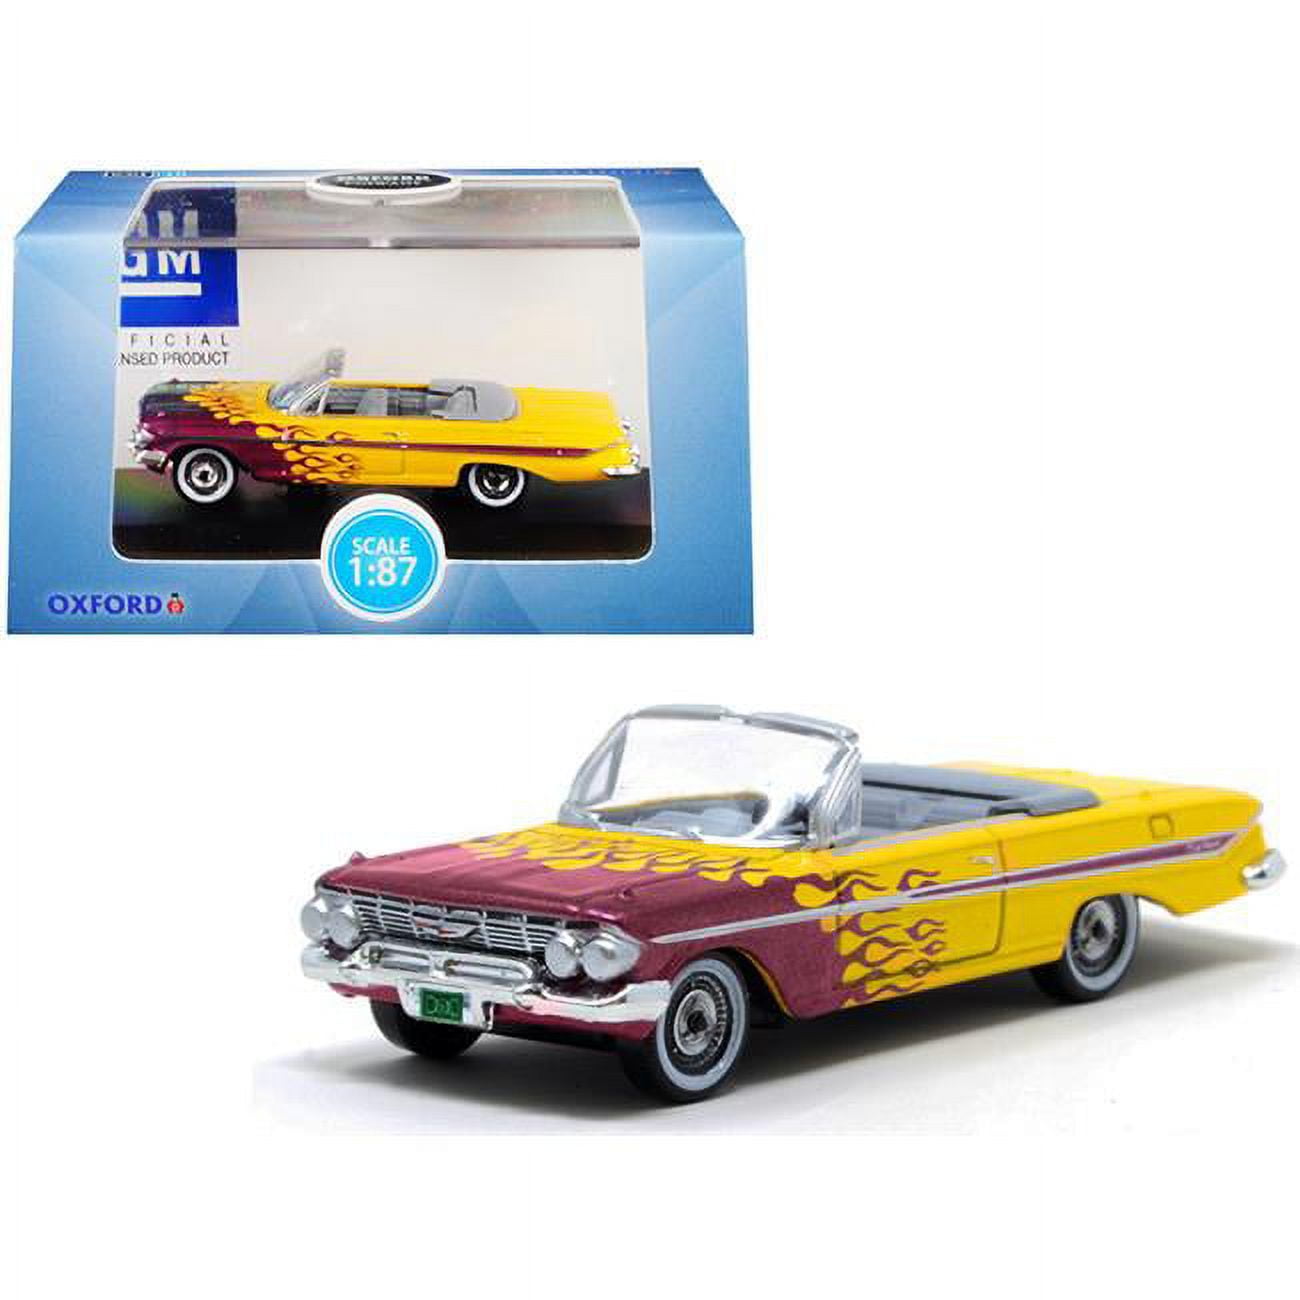 87ci61004 1961 Chevrolet Impala Convertible Flames Hot Rod 1 By 87 Ho Scale Diecast Model Car, Yellow & Purple